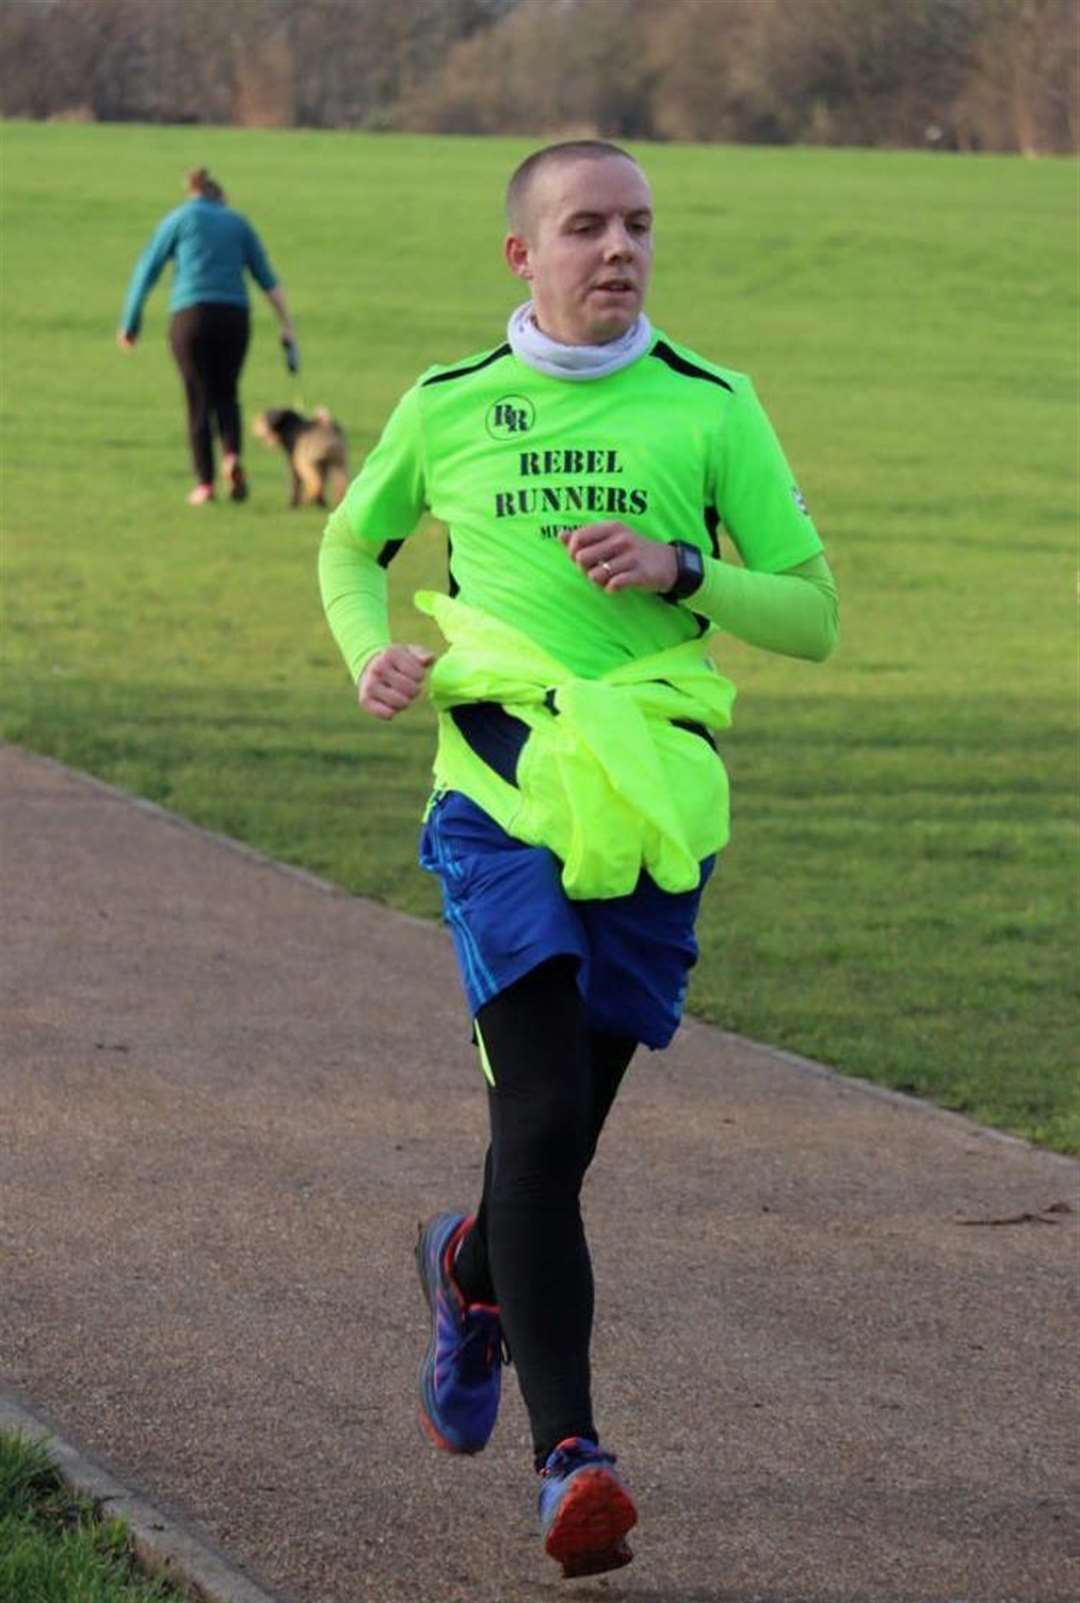 Lee Allen from Queenborough has committed himself to running for three years without a break to raise money for charity